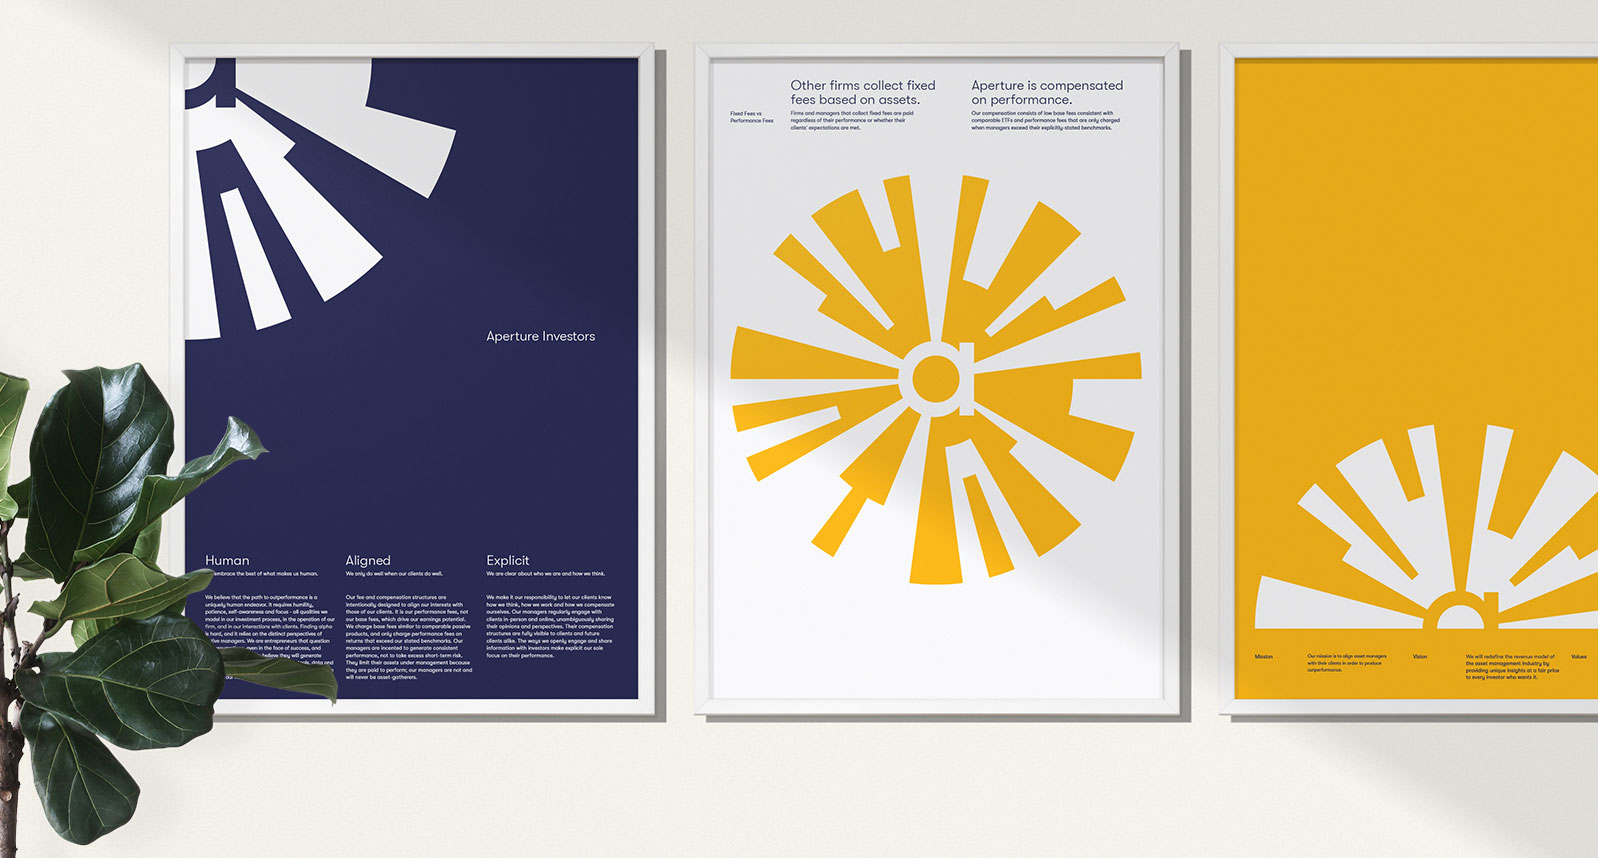 A set of three framed posters with some writings on them and a logo of what represent sectors of a disc.